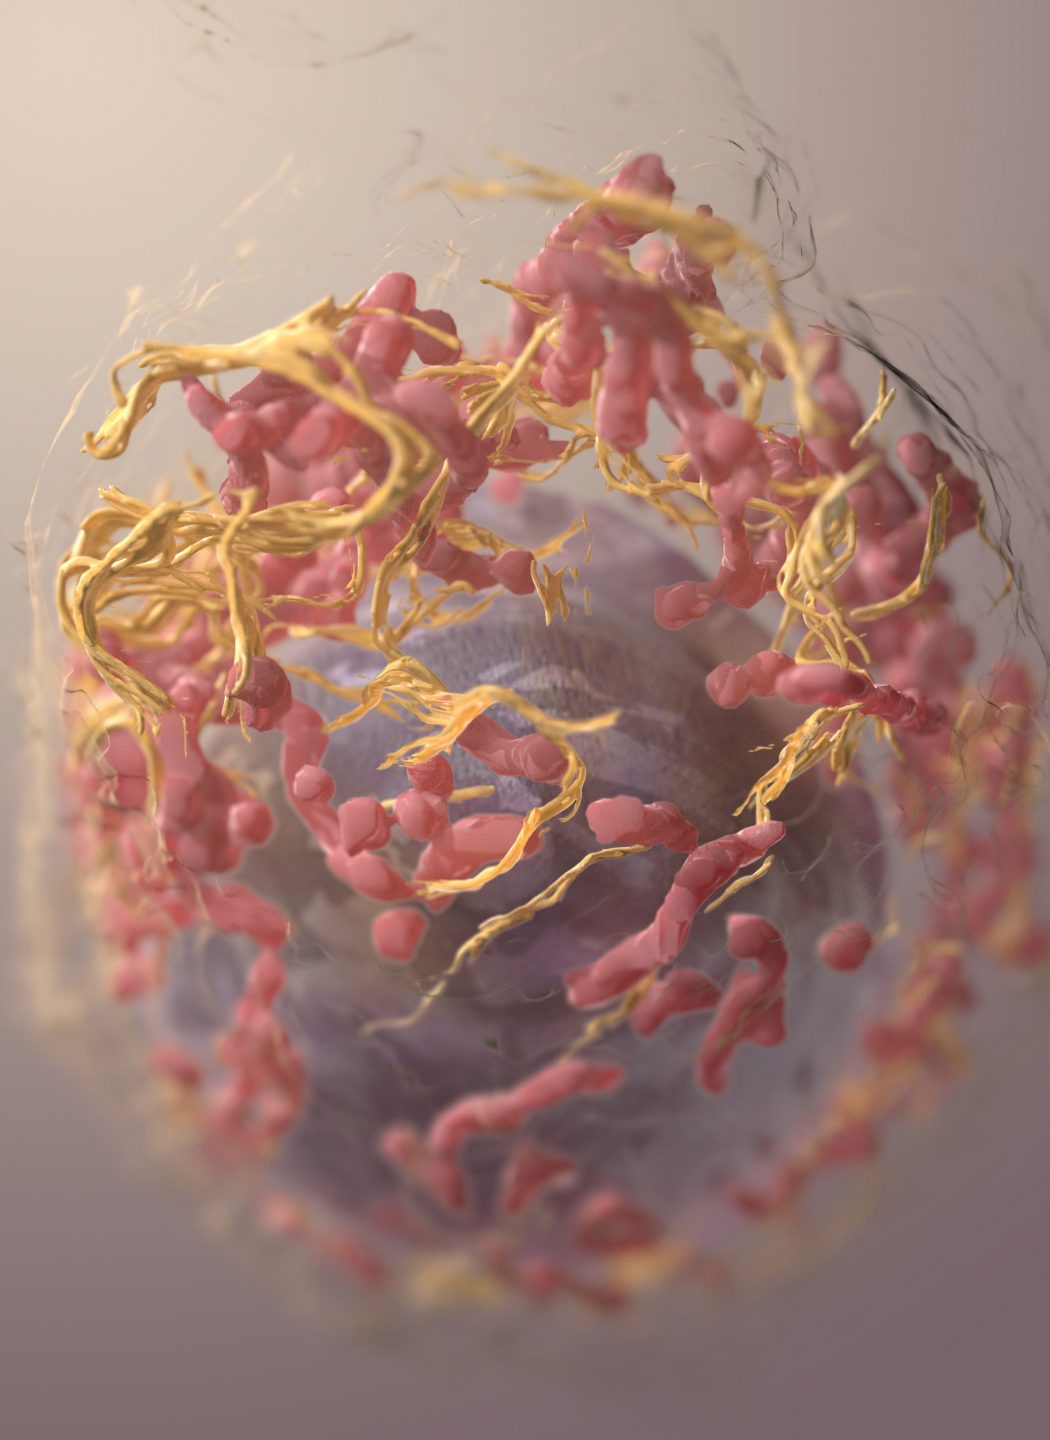 The three-dimensional structure of a melanoma cell.